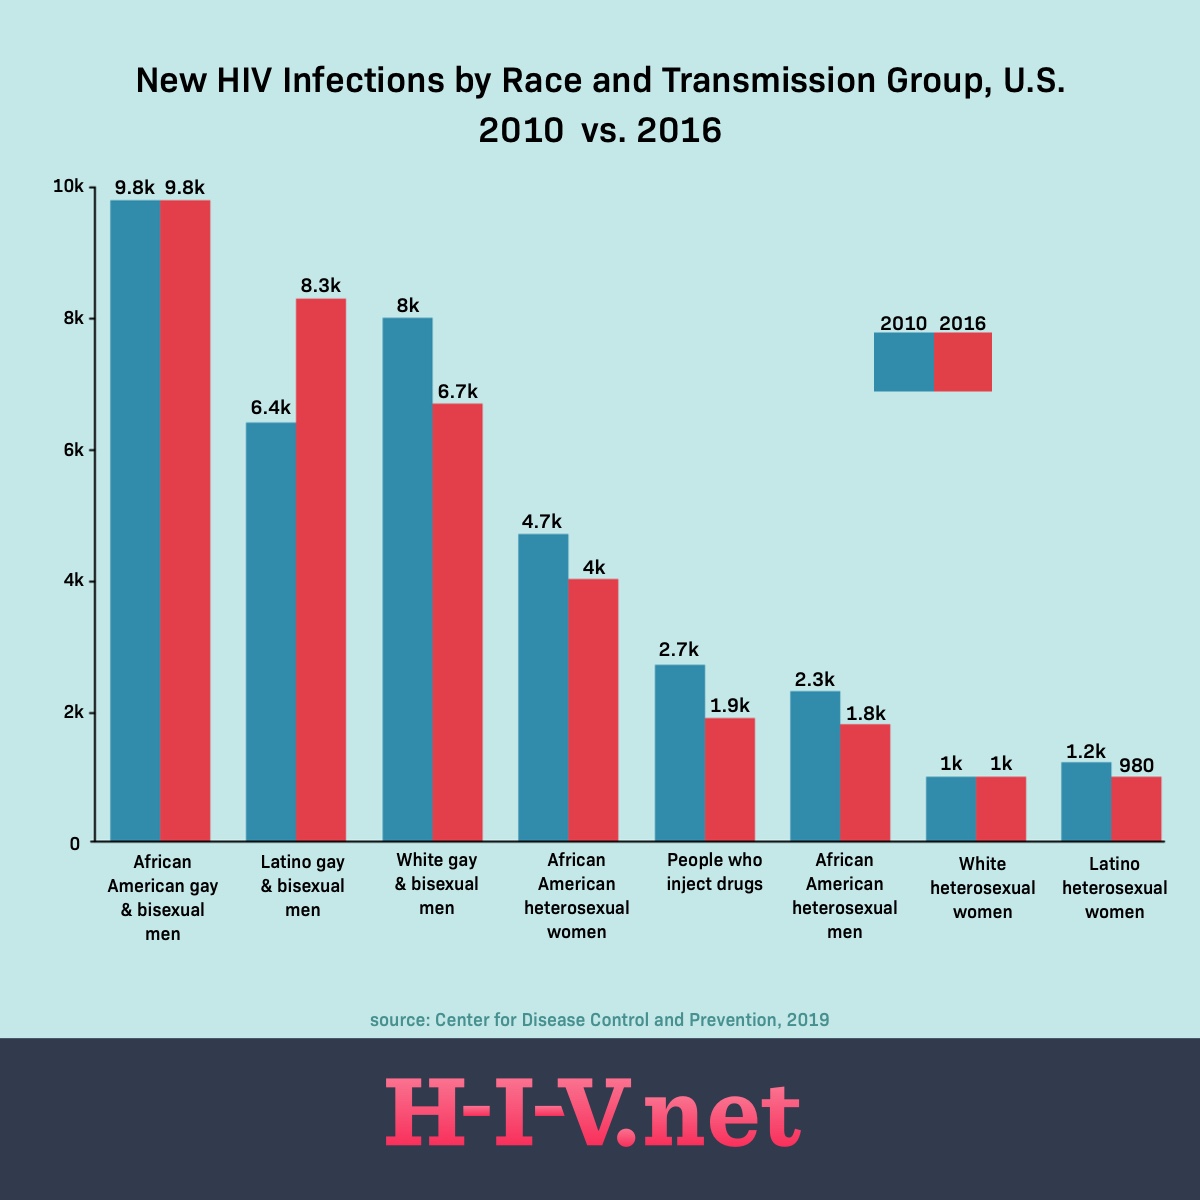 bar graph of new HIV infections by race and transmission groups in the US in 2010 vs 2016